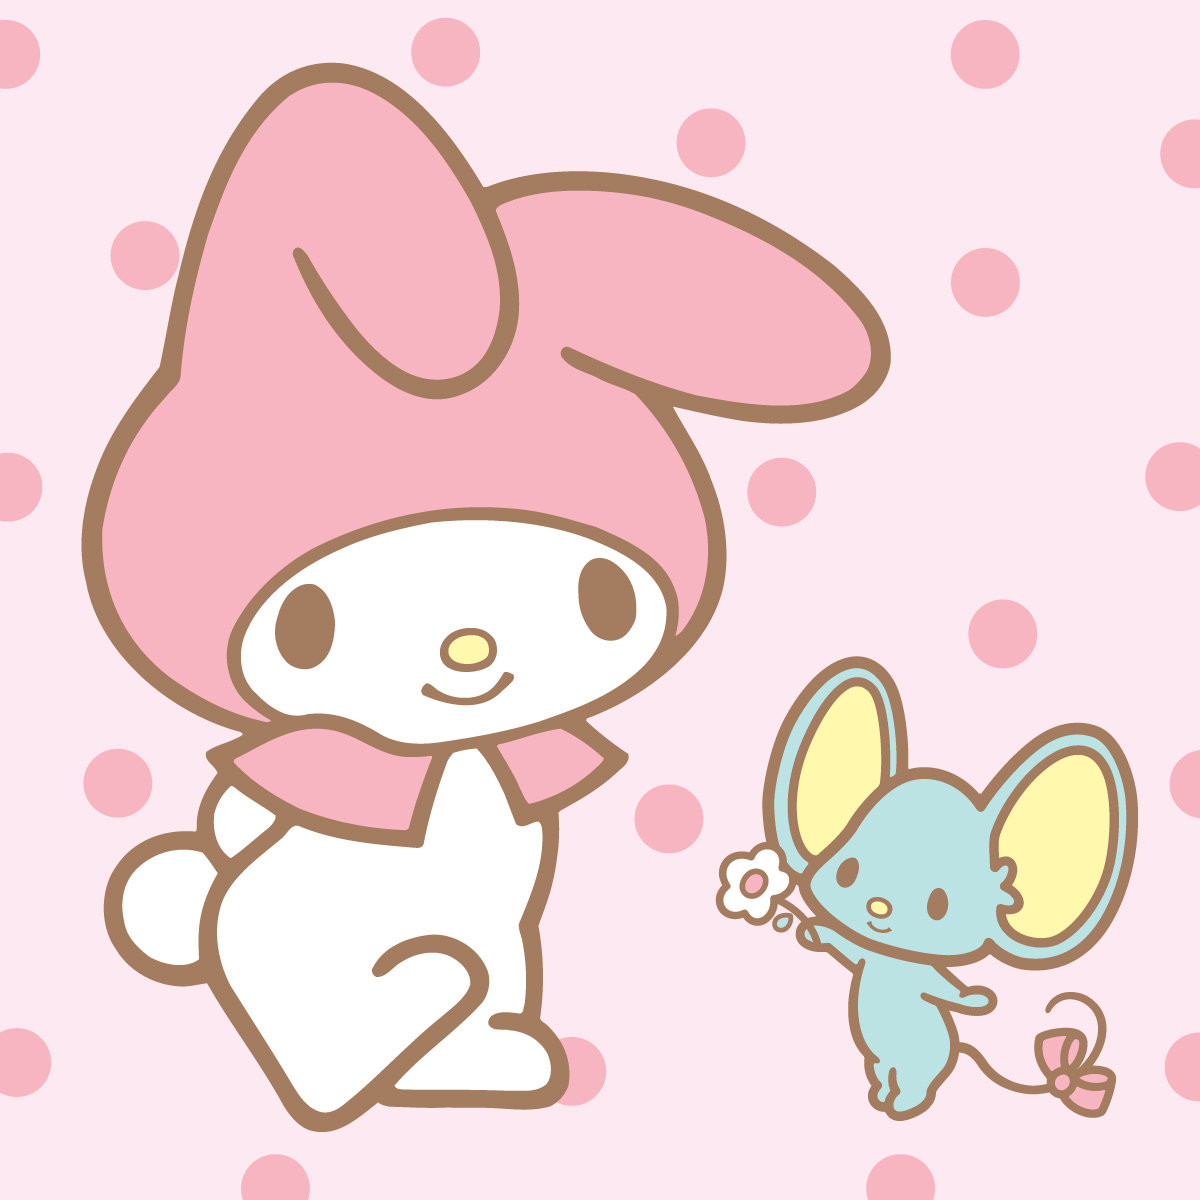 Image Sanrio Characters My Melody Flat Image001 Hello Kitty Wiki Fandom Powered By Wikia